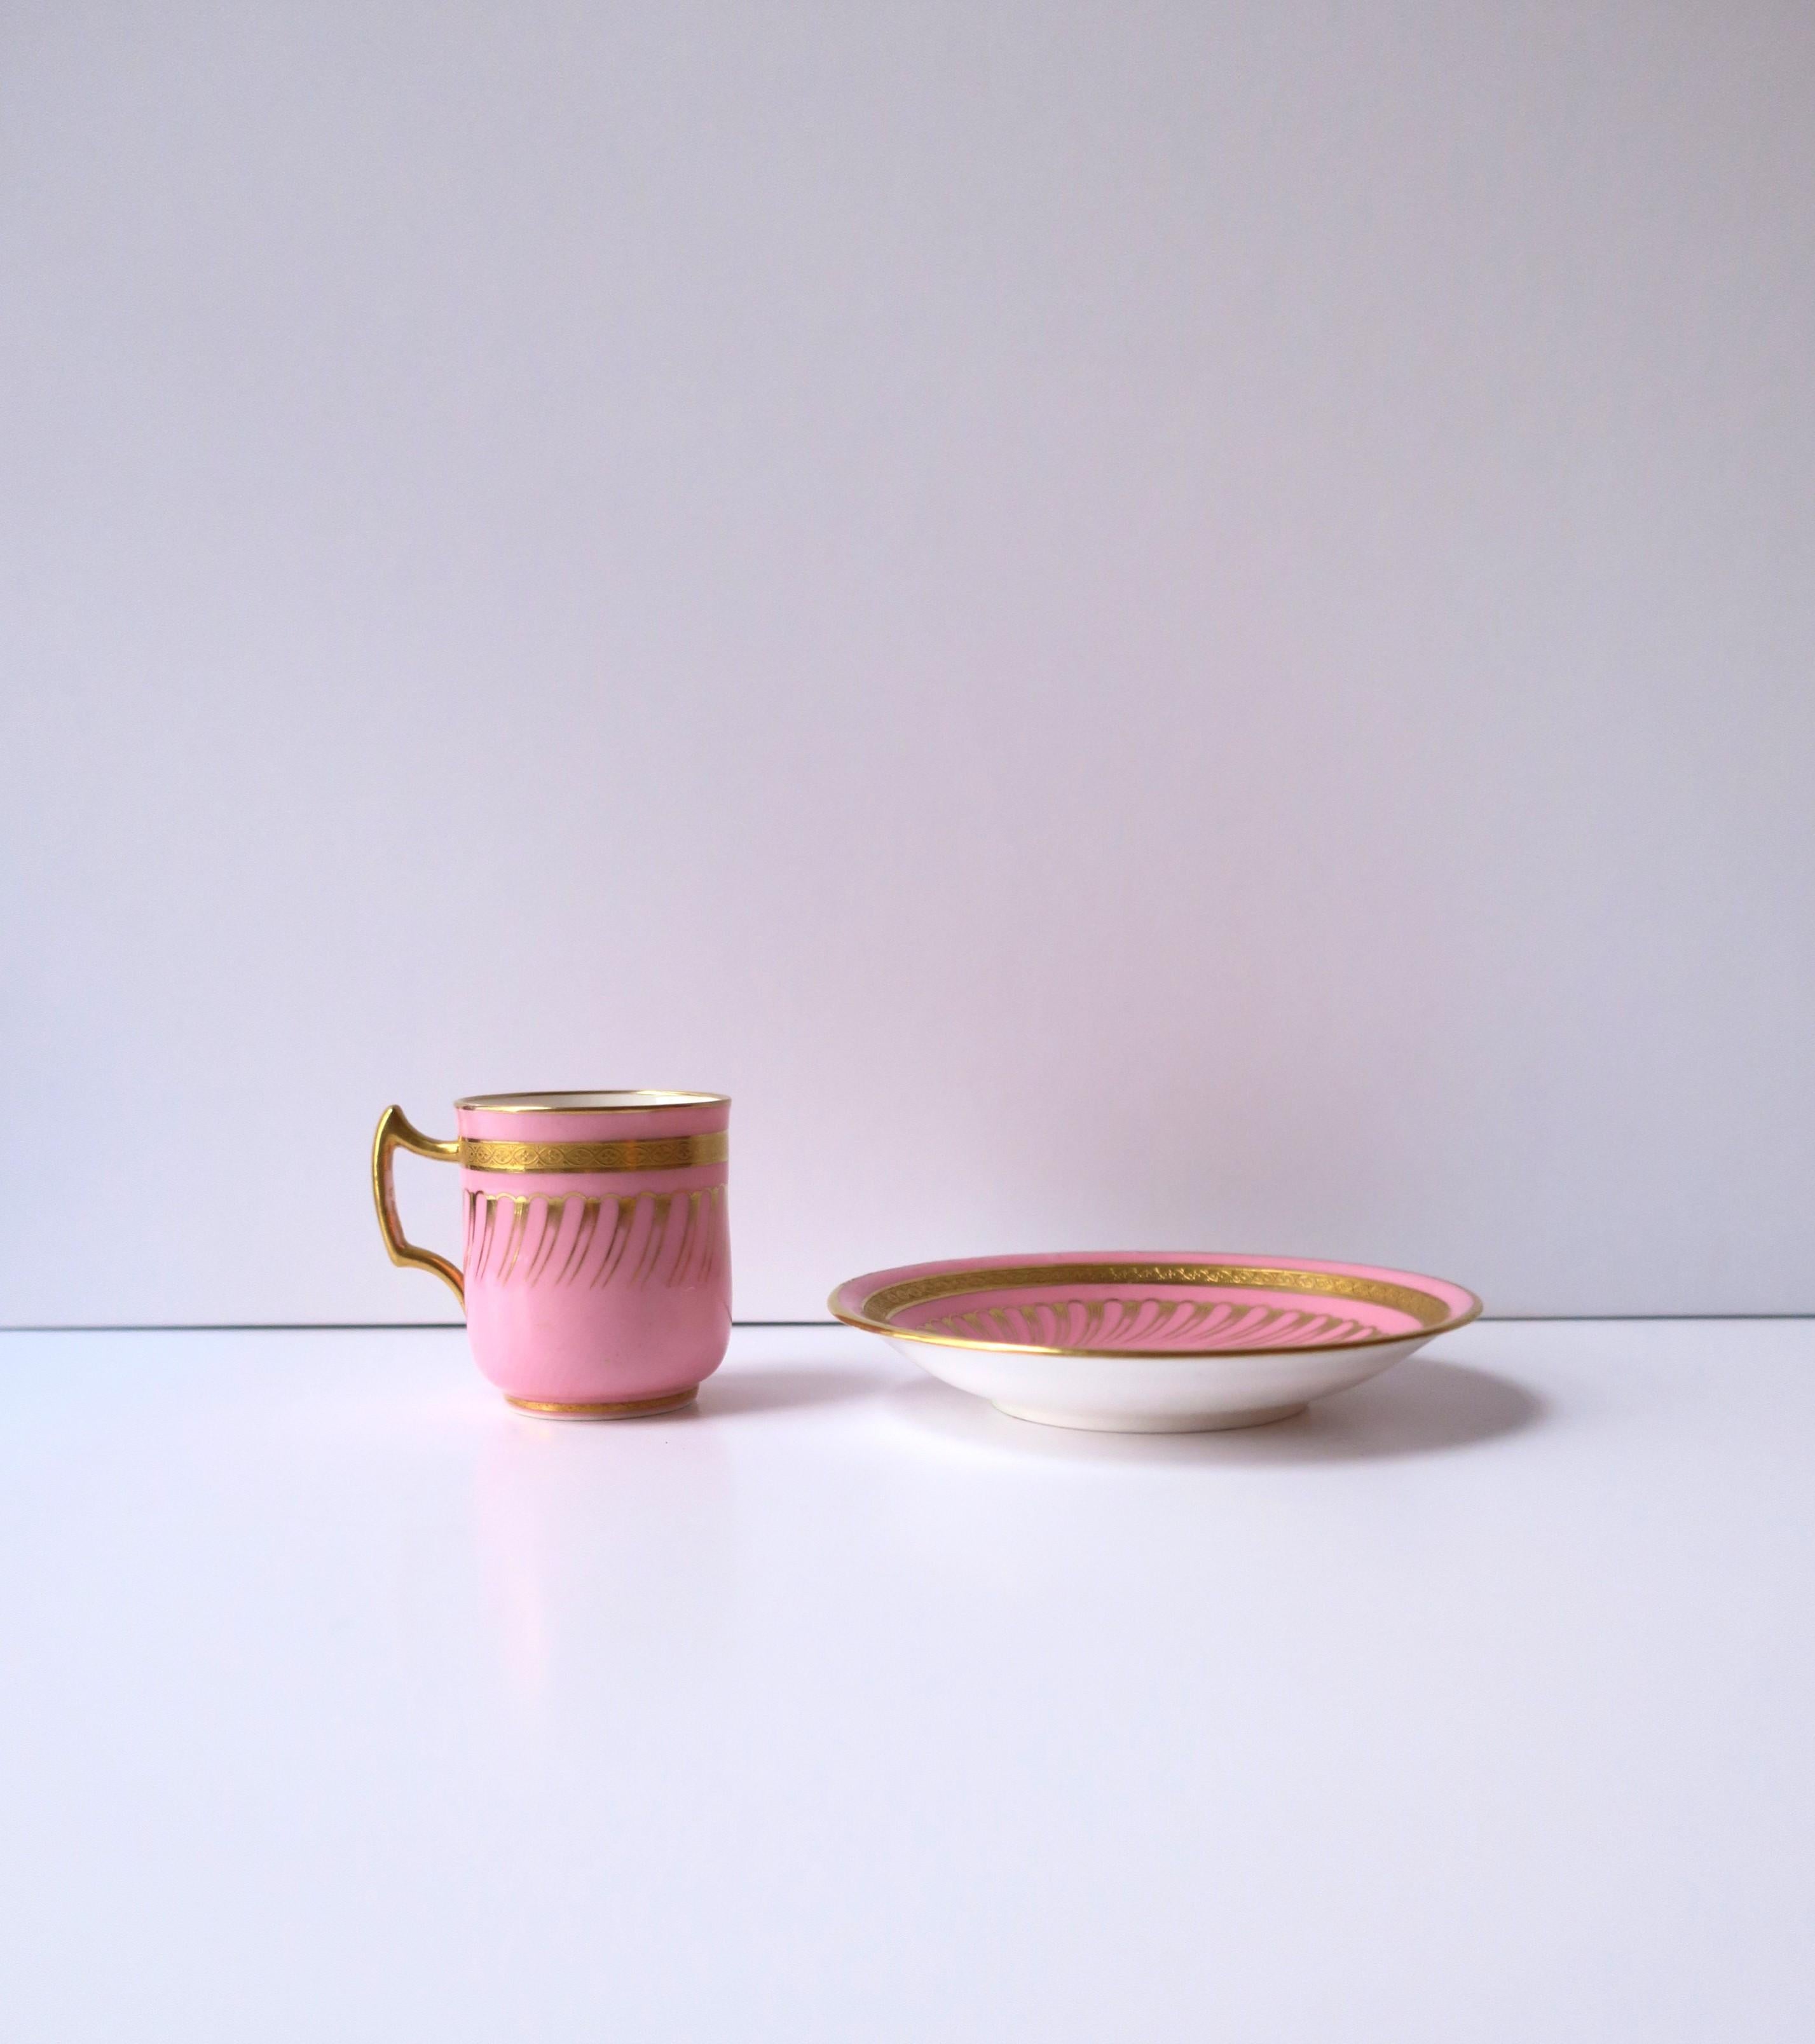 English Minton Pink & Gold Porcelain Coffee Espresso Cup & Saucer, 19th century For Sale 2